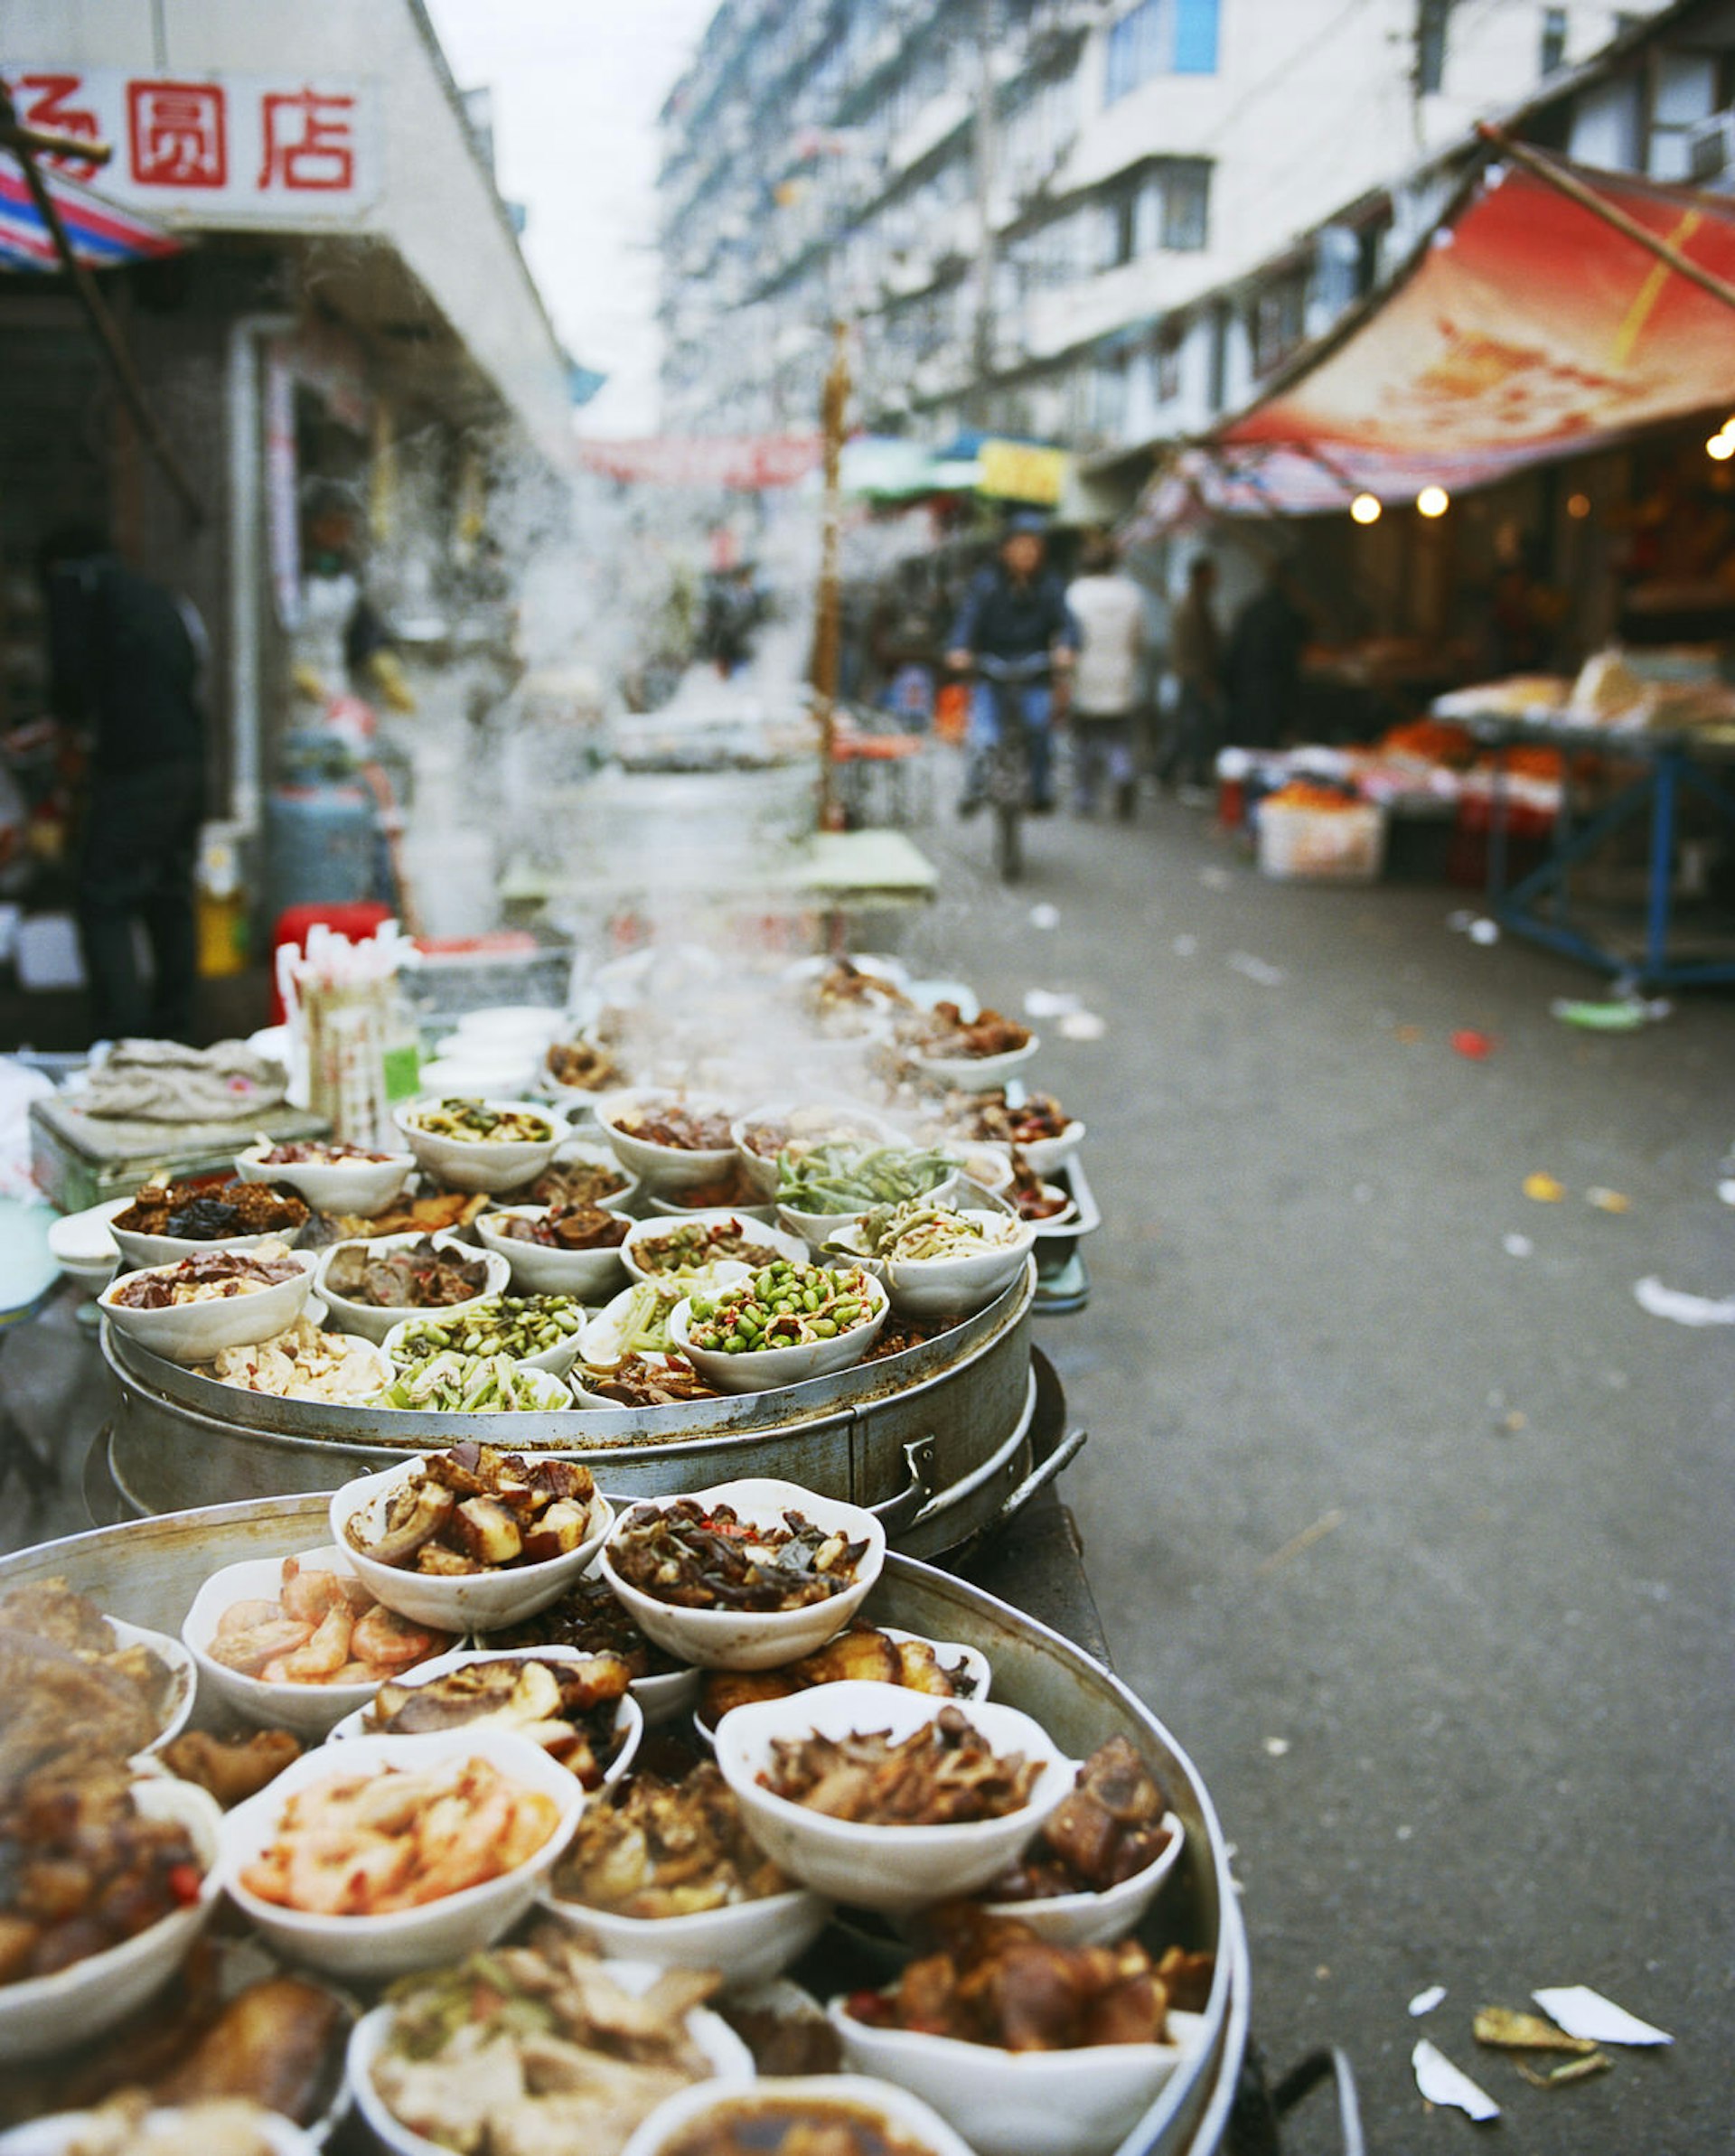 A series of small dishes at a food stand on Sipailou Street near Yu Gardens, Shanghai. The dishes include deep-fried shrimp, red-braised pork, and fava beans.